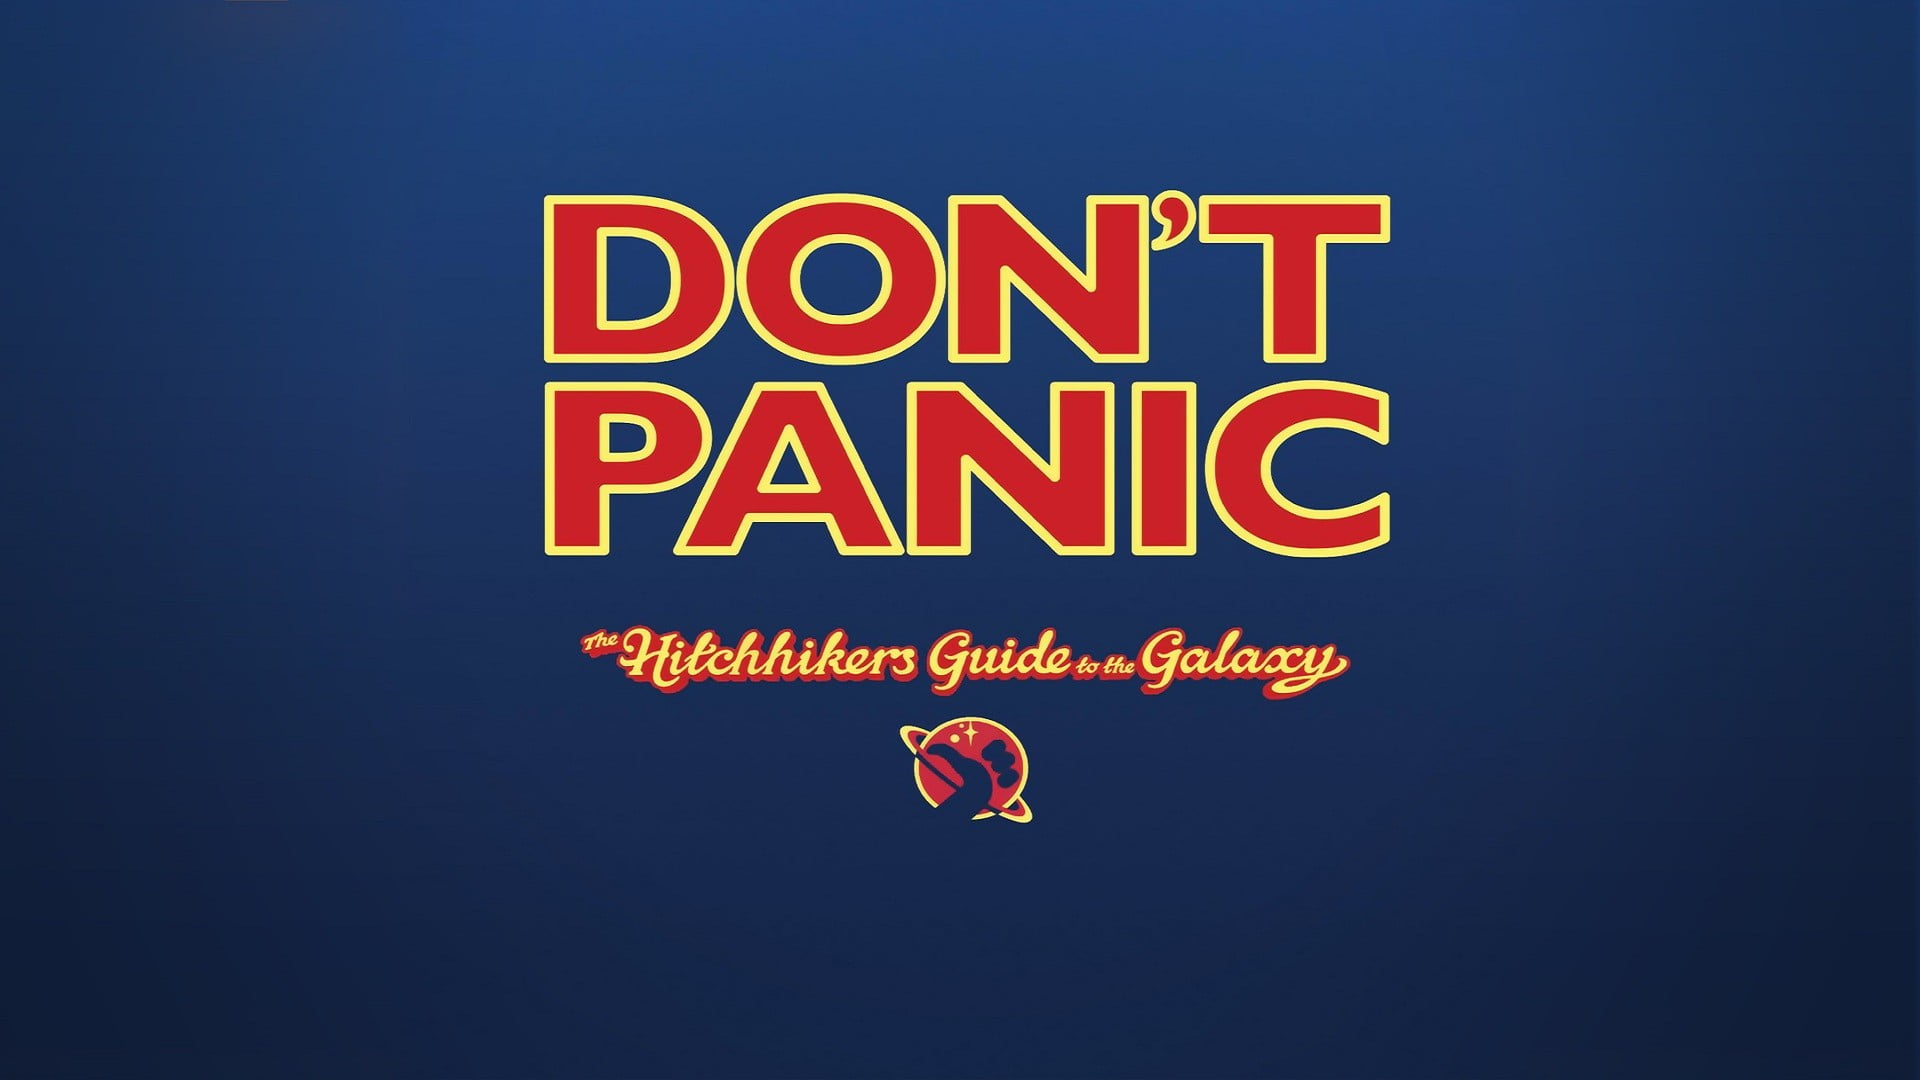 red text on blue background, The Hitchhiker's Guide to the Galaxy, typography, blue background